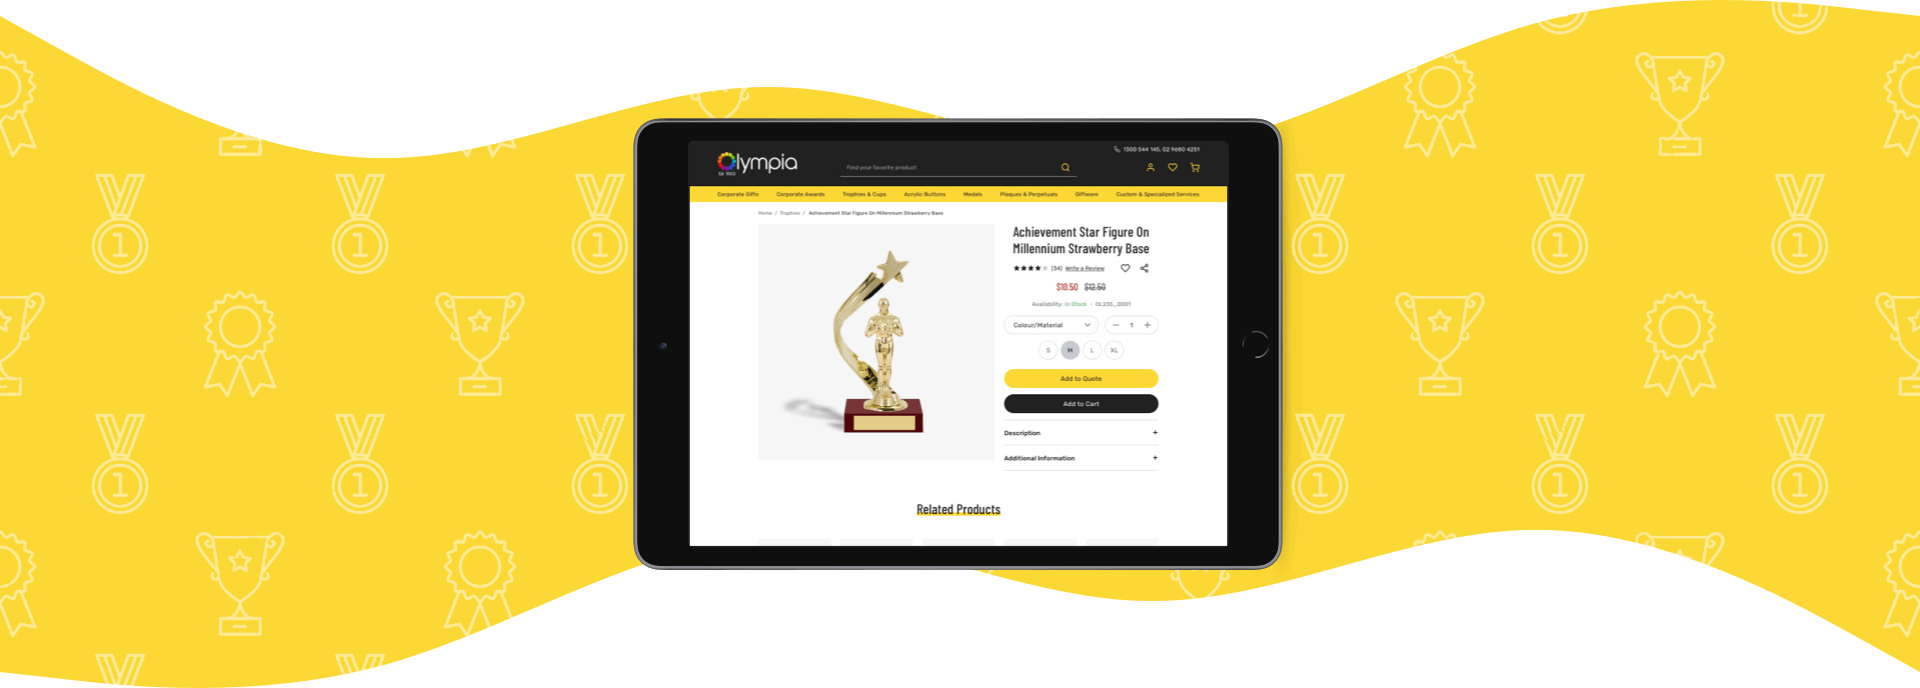 Magento IT Solution Olympia – Casestudy